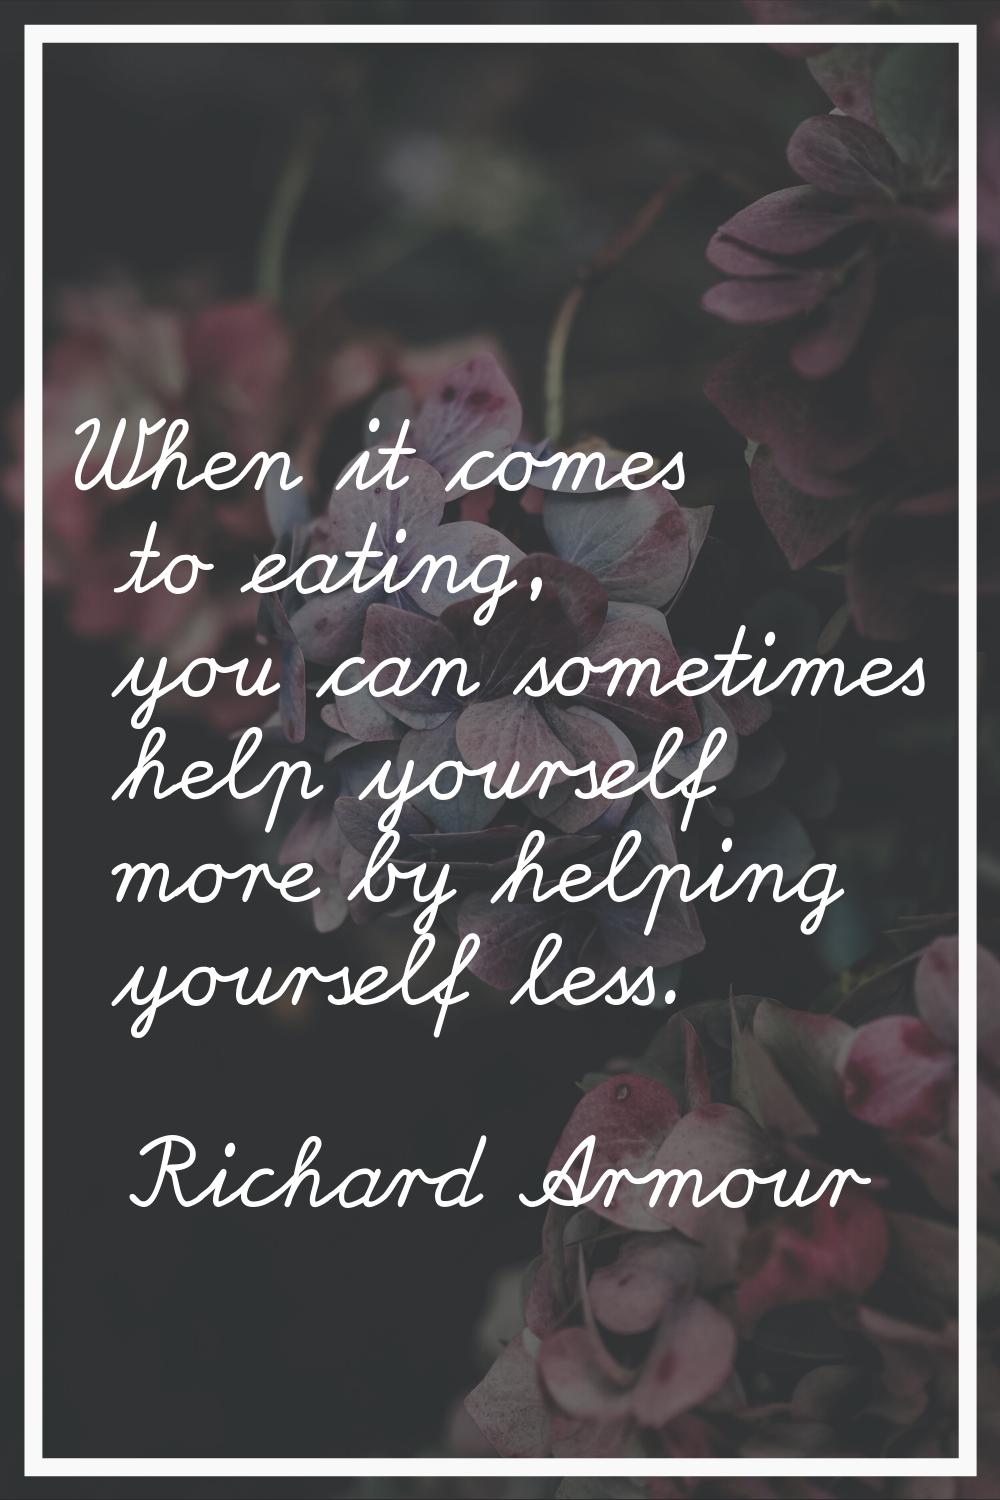 When it comes to eating, you can sometimes help yourself more by helping yourself less.